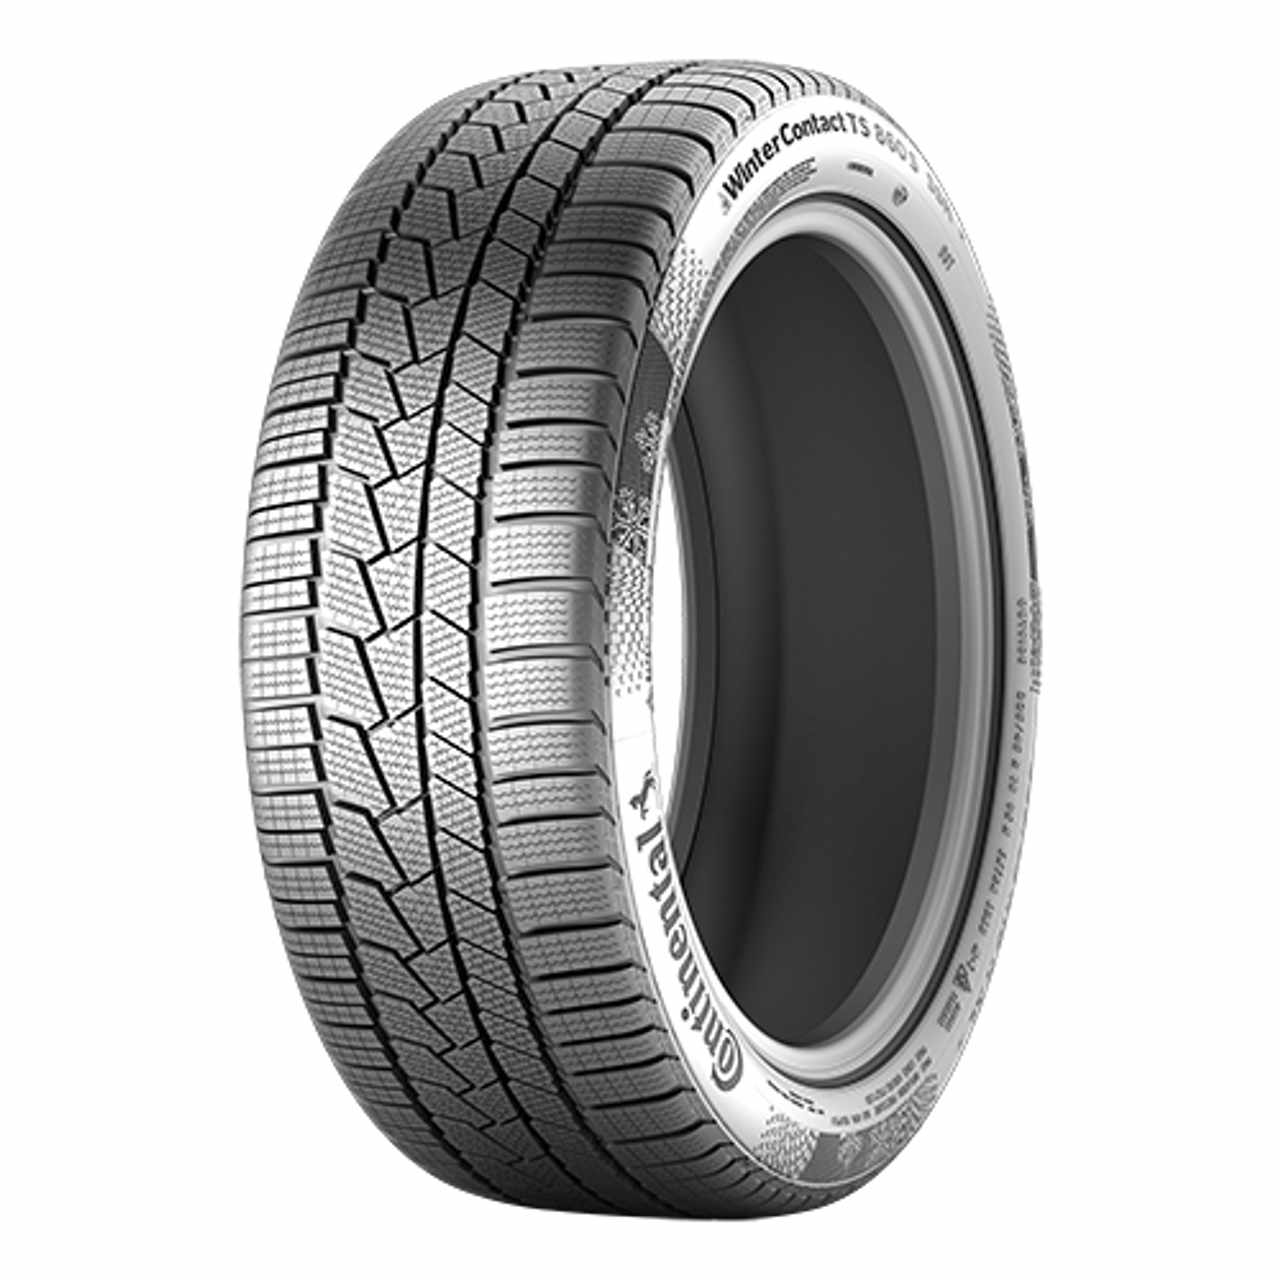 CONTINENTAL WINTERCONTACT TS 860 S (*) (MO) (EVc) 275/40R19 105H BSW